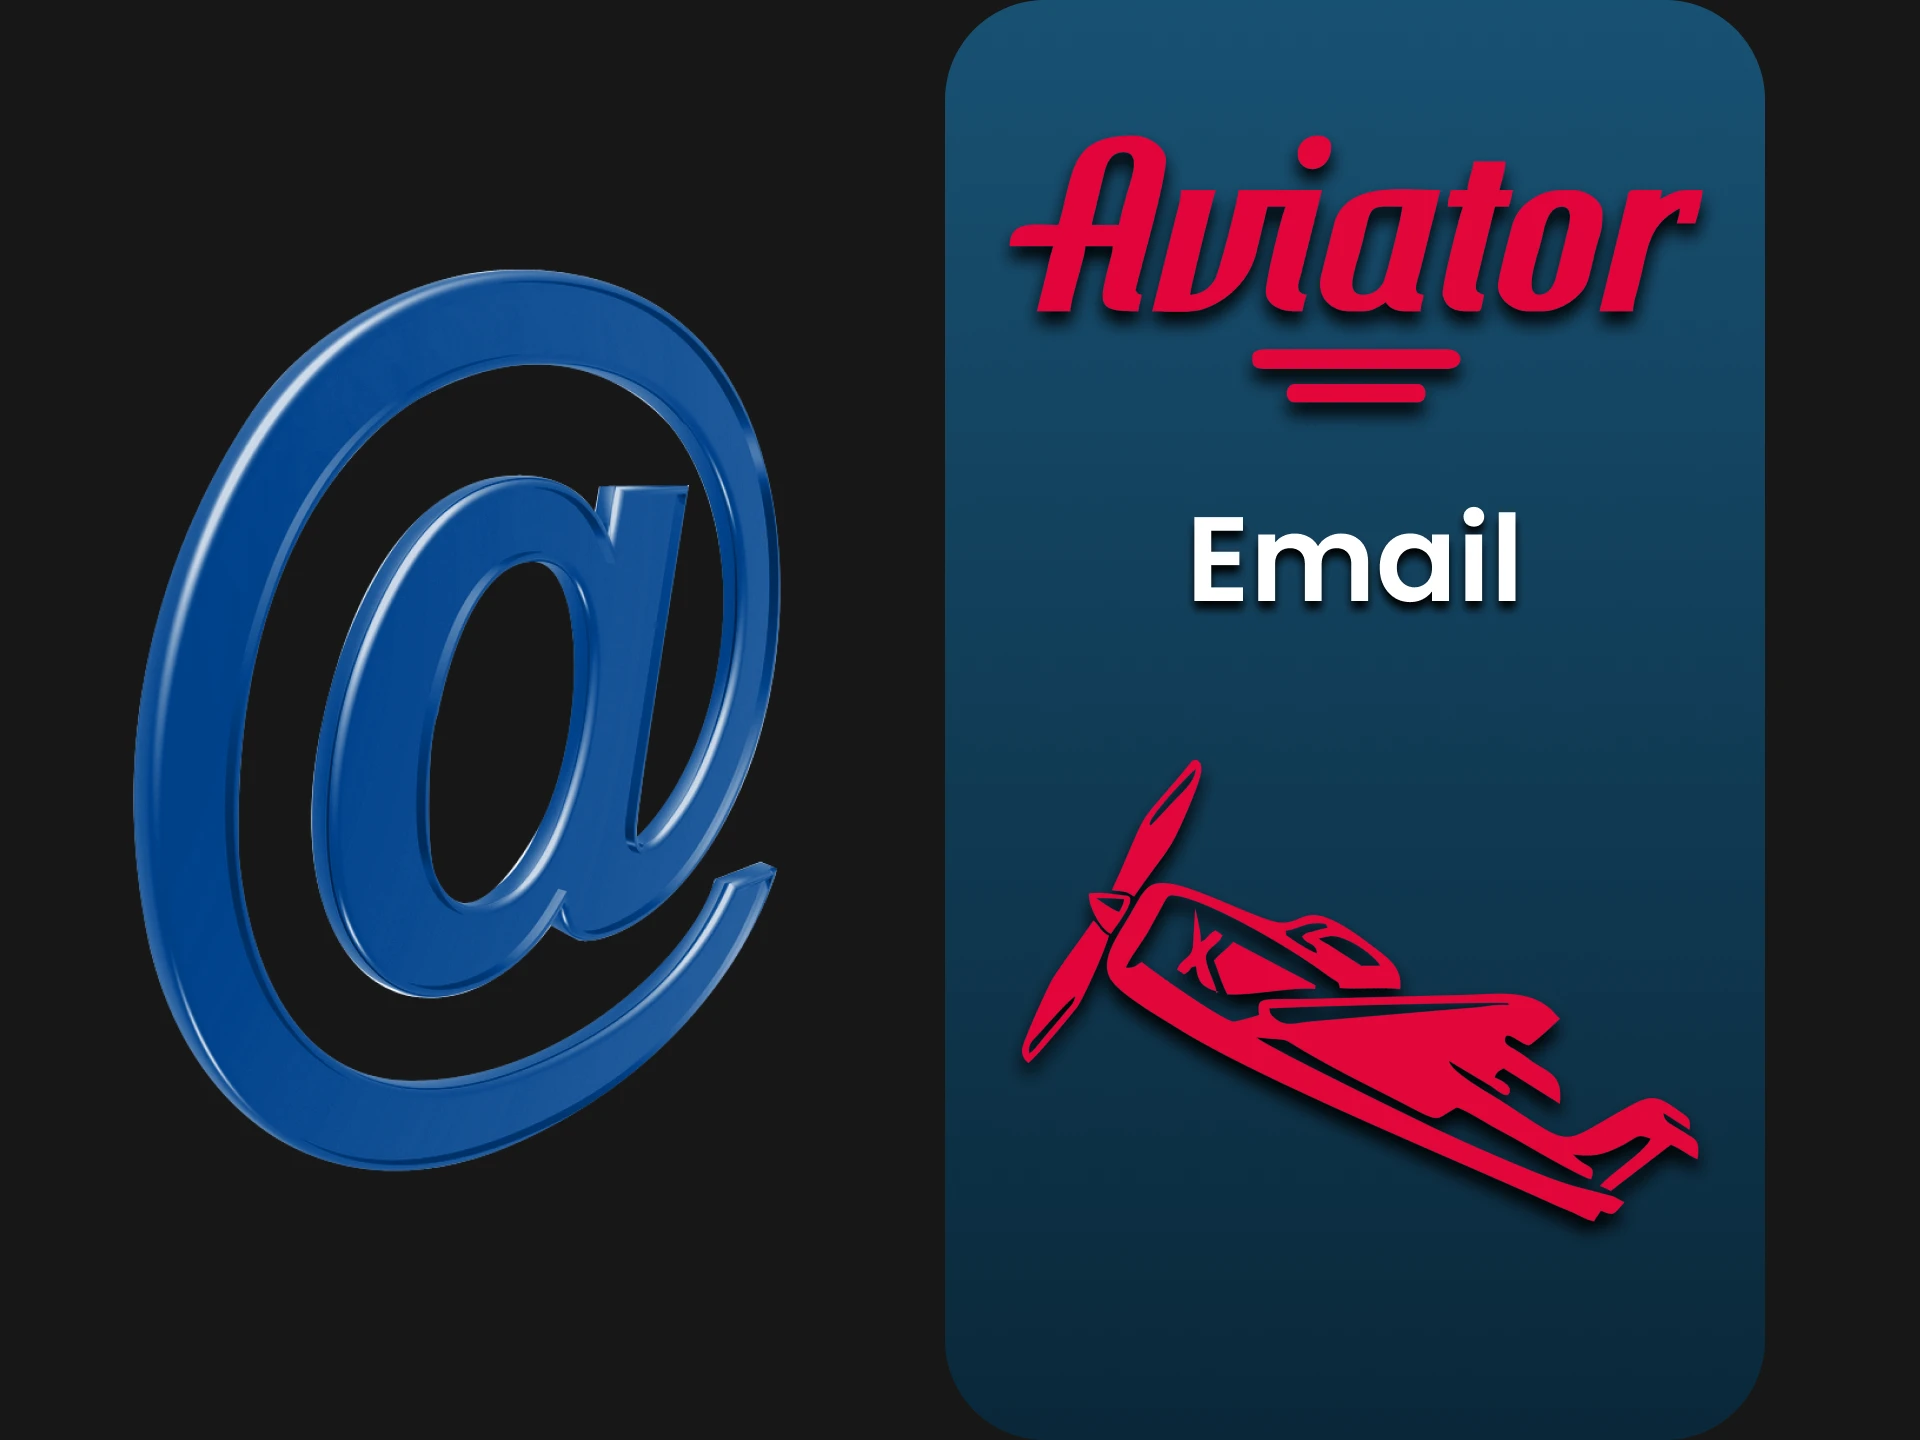 You can contact the Aviator team via email.